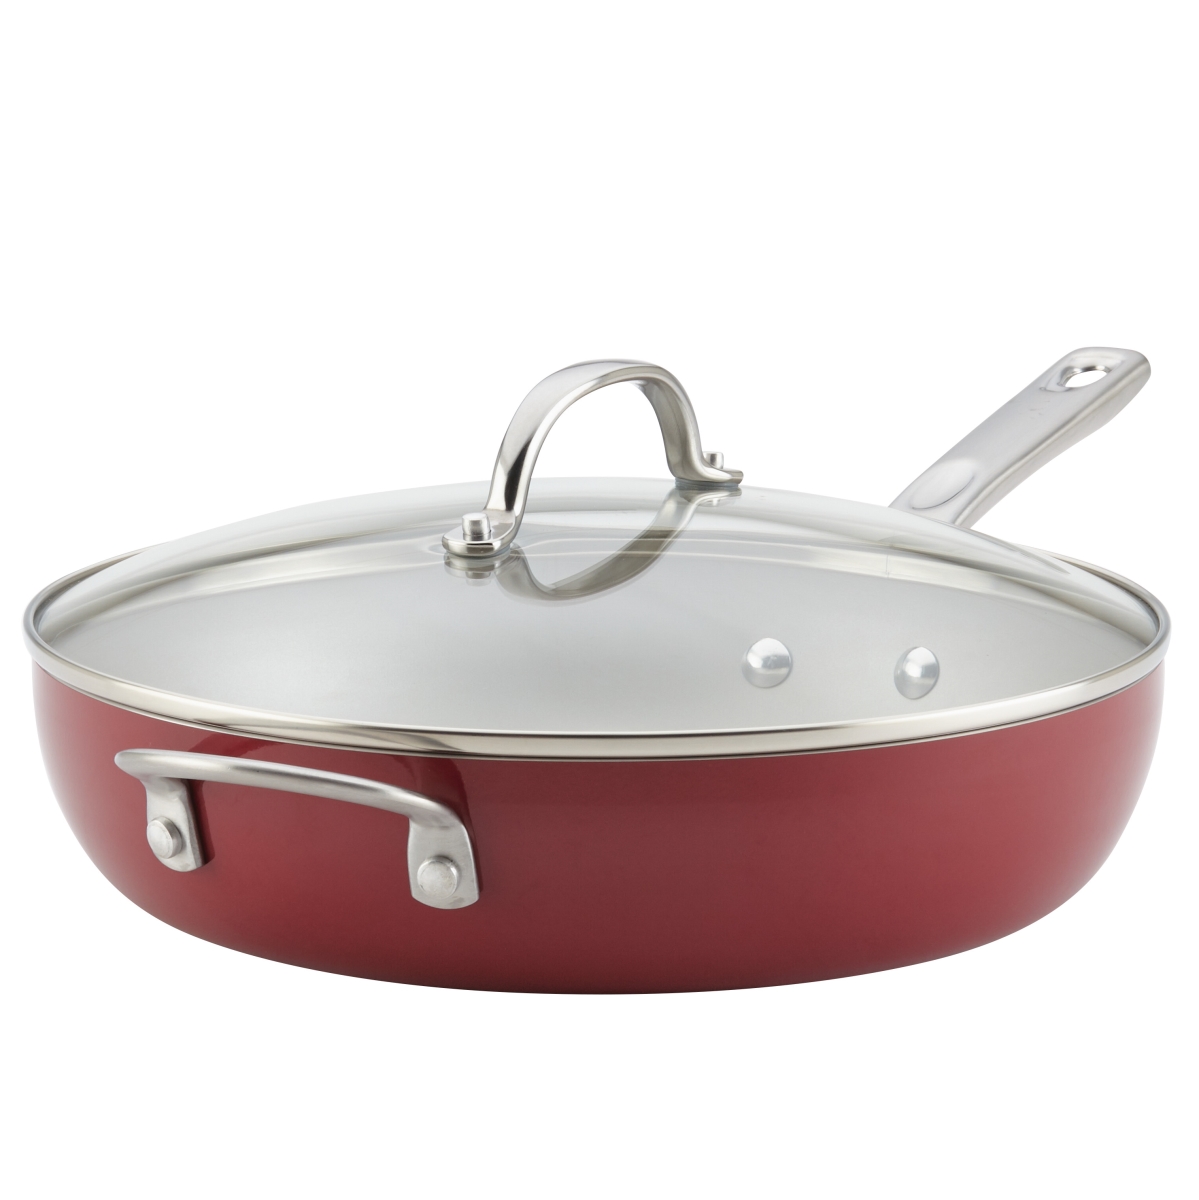 Picture of Ayesha Curry 10748 Porcelain Enamel Nonstick Covered Deep Skillet with Helper Handle, 12 in. - Sienna Red